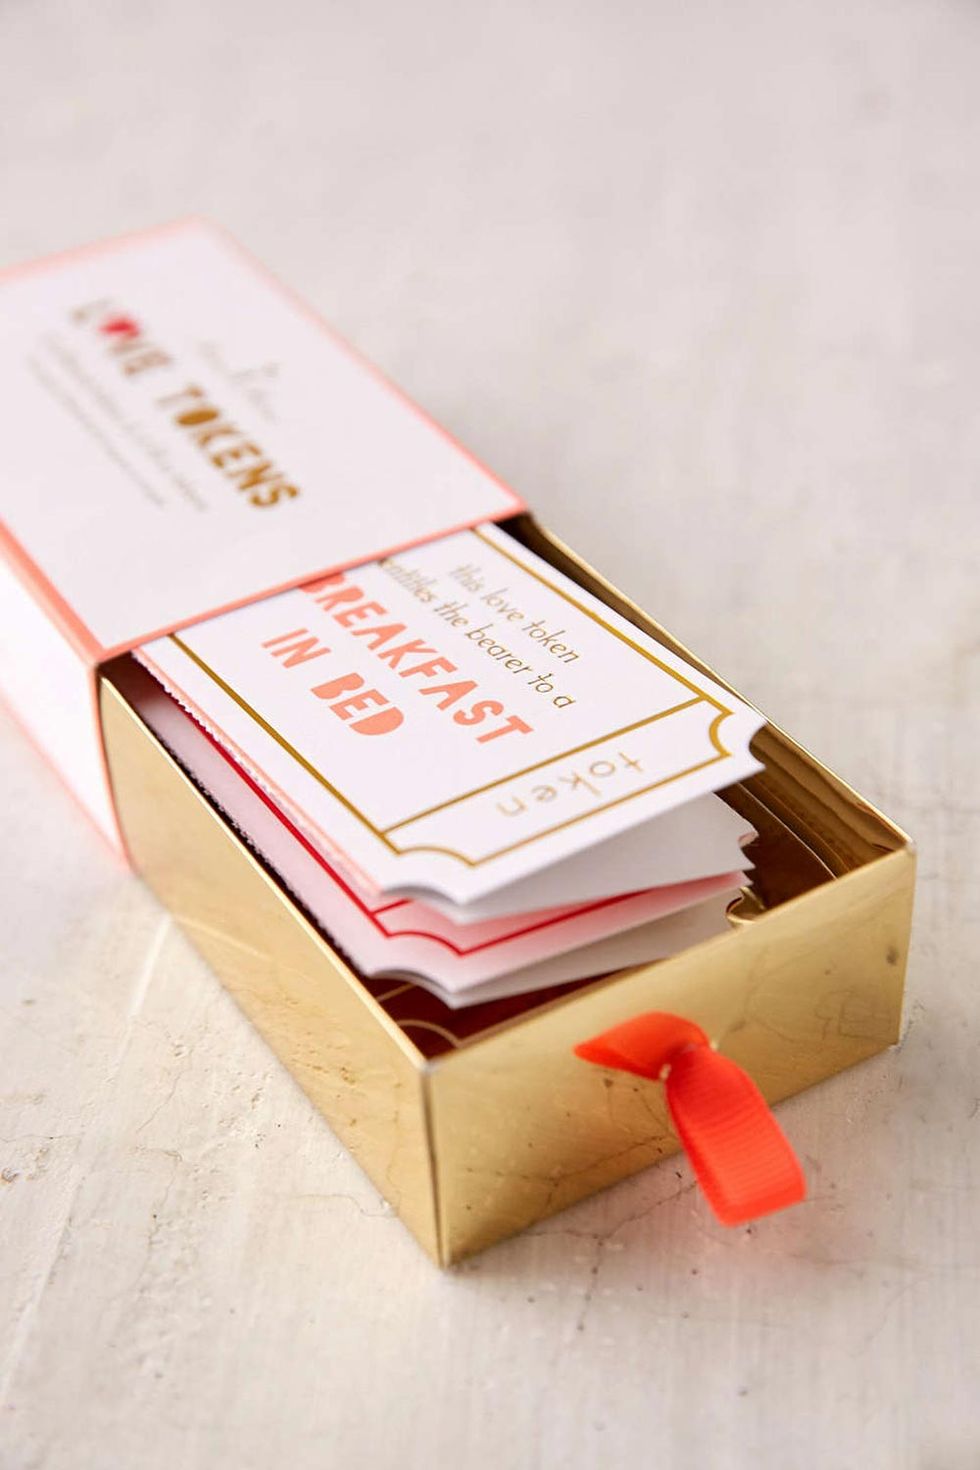 21 Cute Mini Gifts - Tiny Gift Ideas for Her